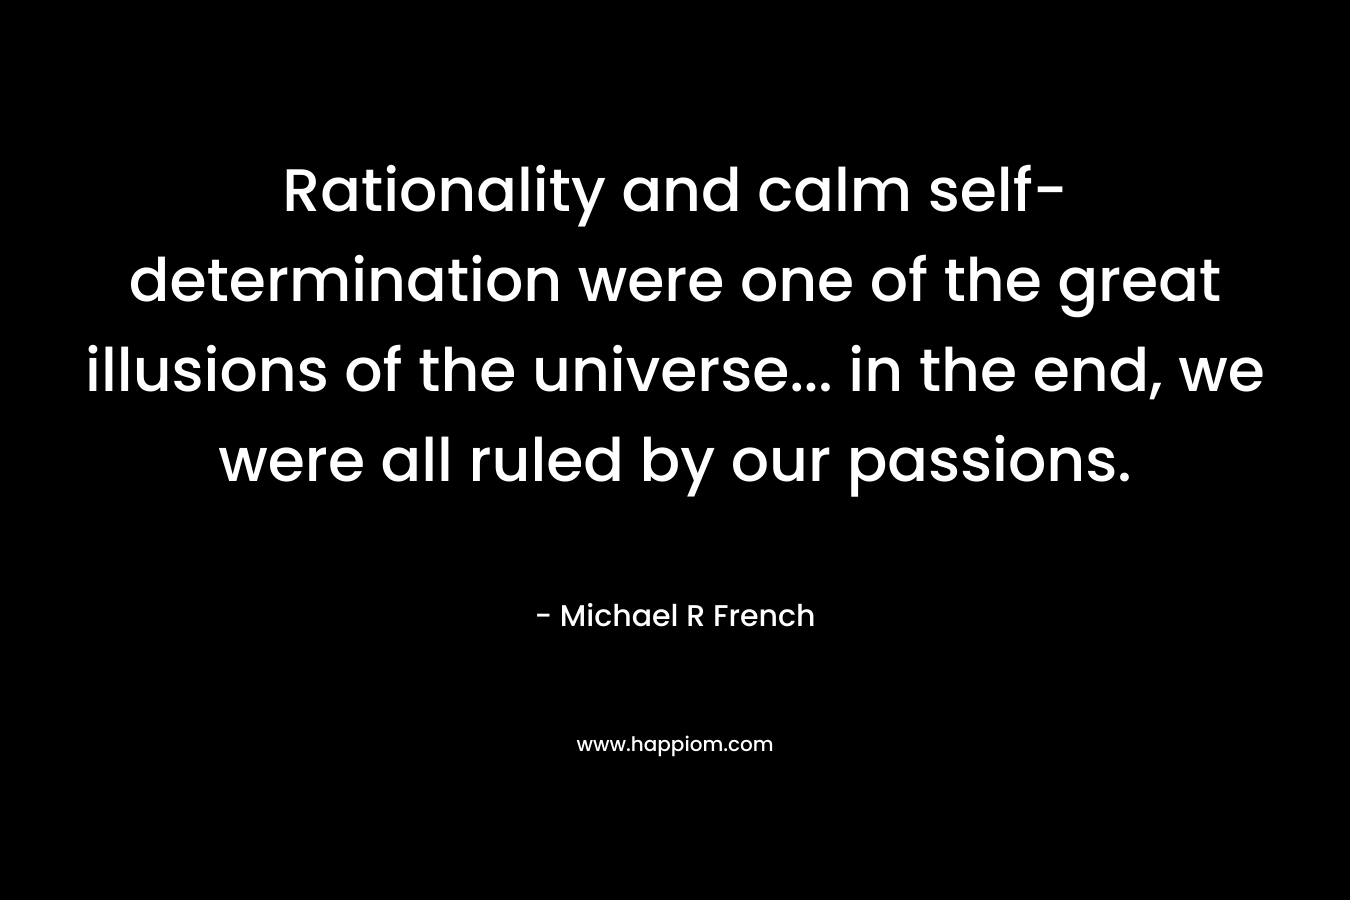 Rationality and calm self-determination were one of the great illusions of the universe… in the end, we were all ruled by our passions. – Michael R French